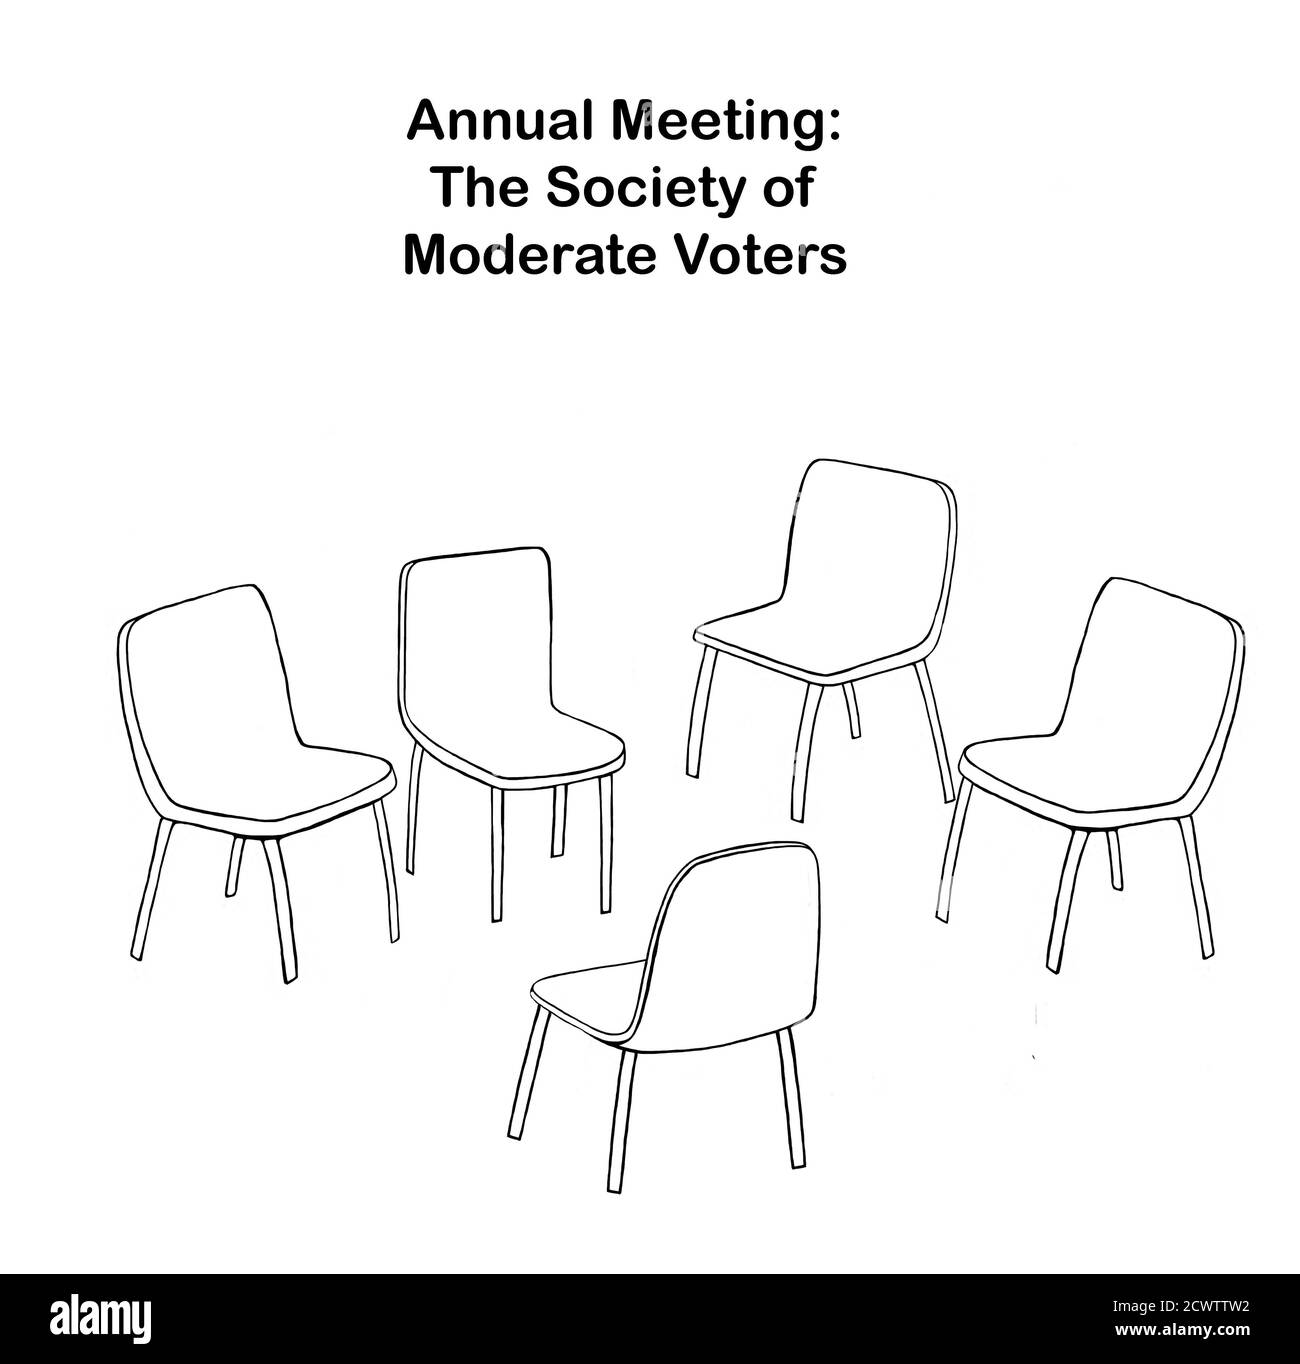 Cartoon showing empty chairs at the Annual Meeting of the Society of Moderate Voters. Stock Photo